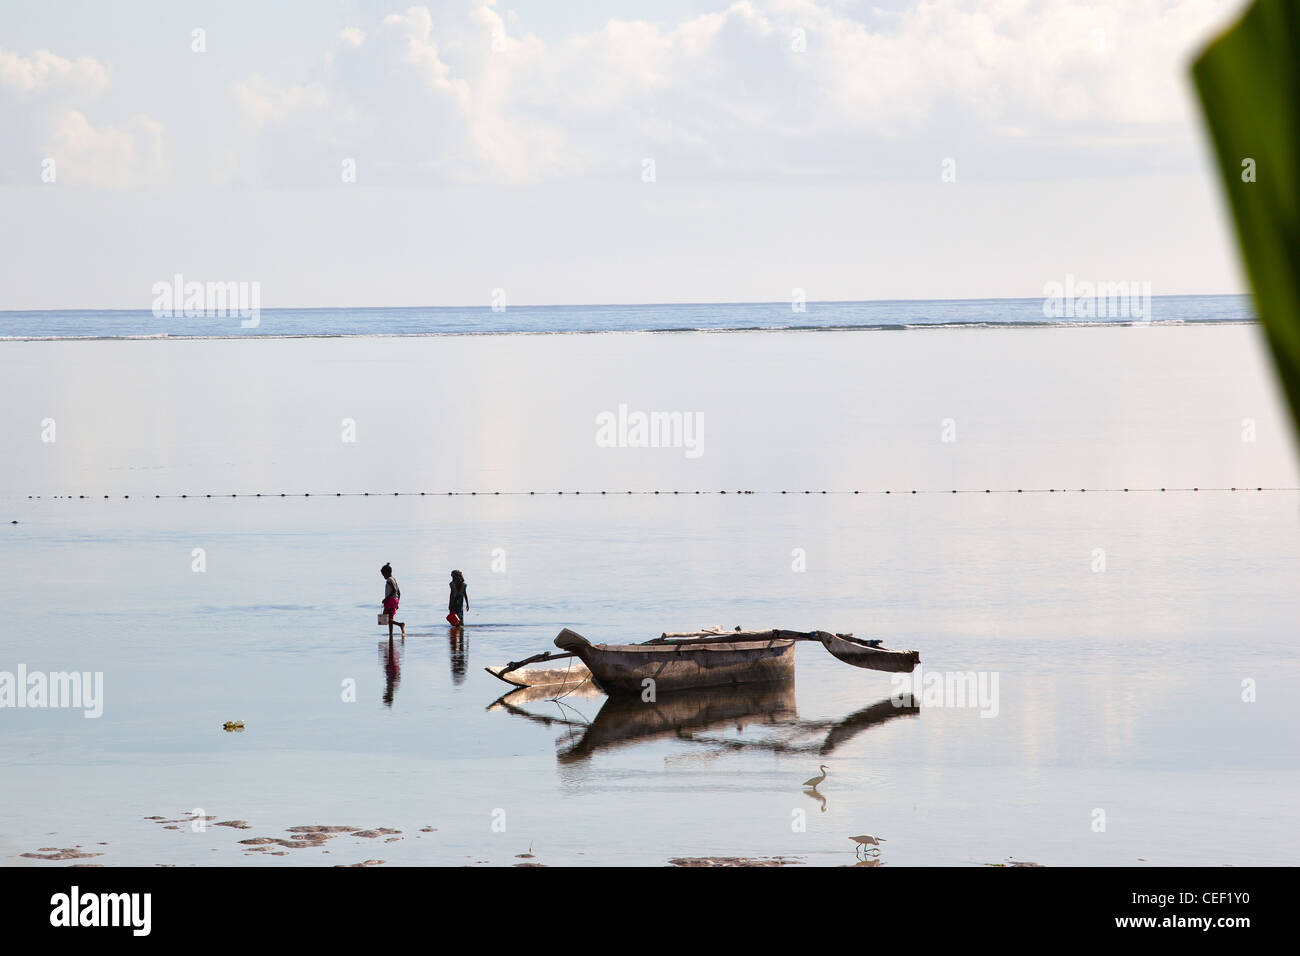 Two Zanzibari village girls going out to catch octopus in the sea at low tide off the coral reef at Bwejuu, Zanzibar Island, Tanzania Stock Photo